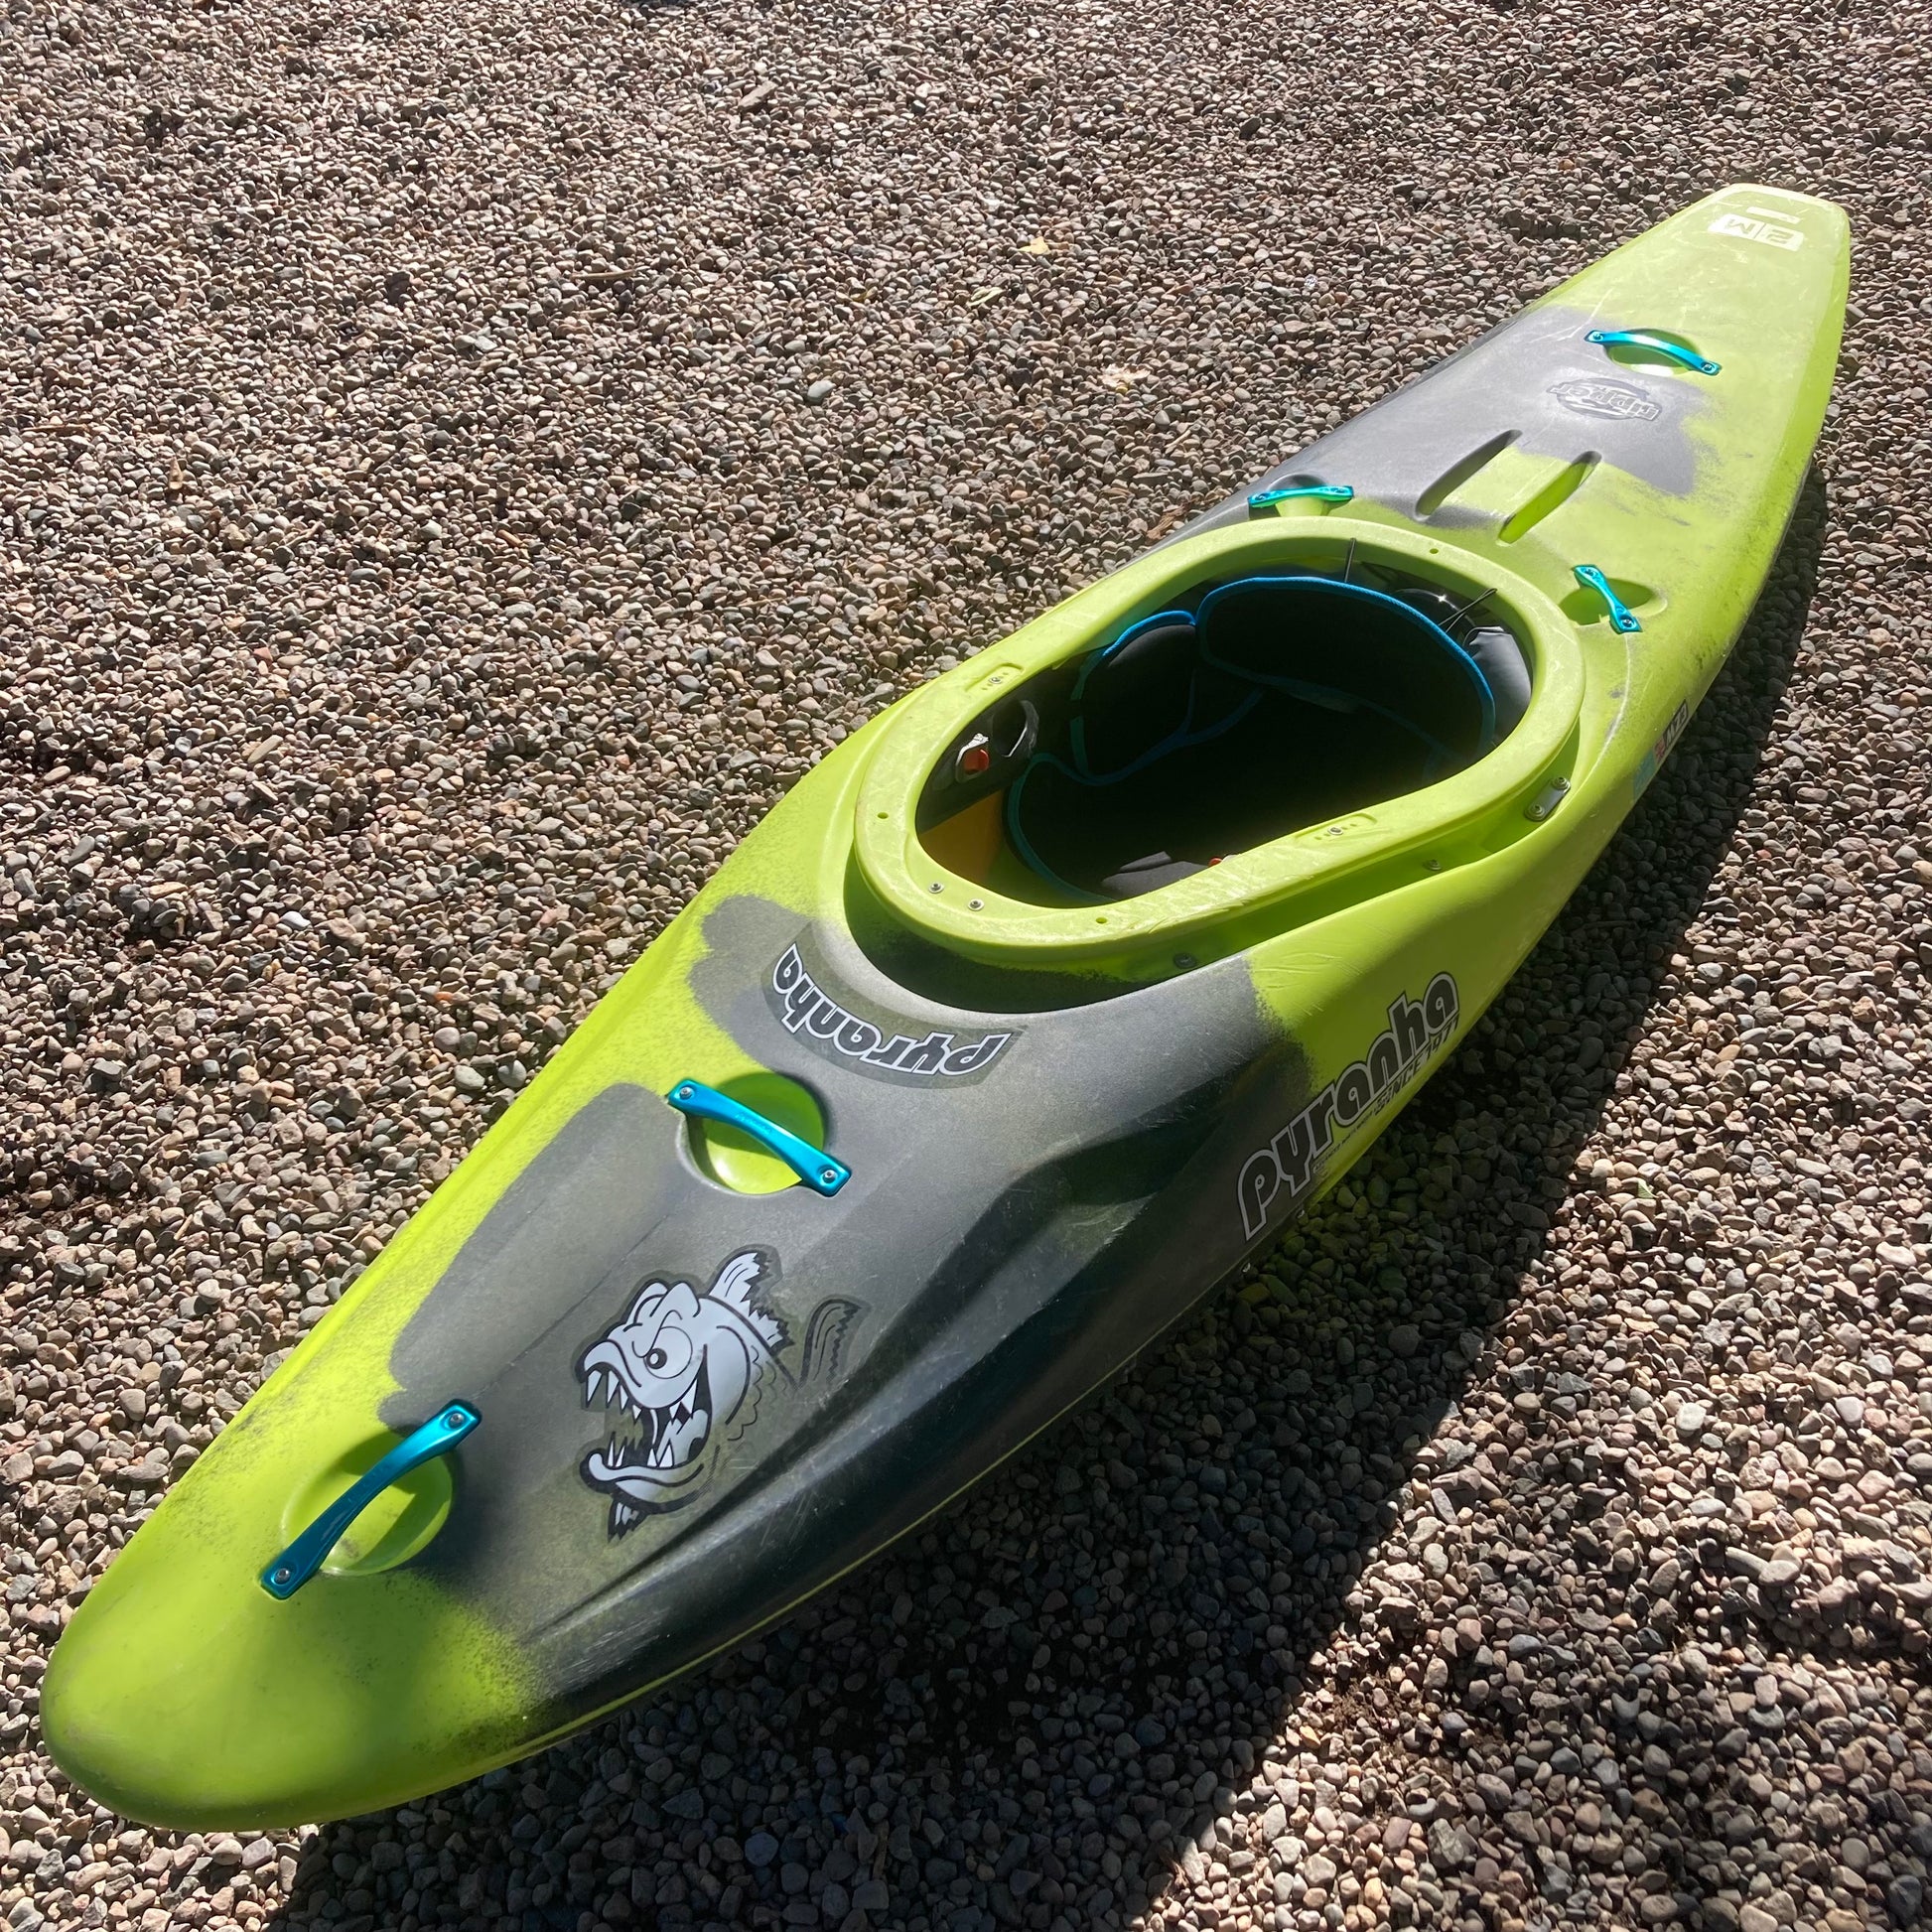 A Pyranha Demo Ripper 2.0 MD kayak laying on the ground.